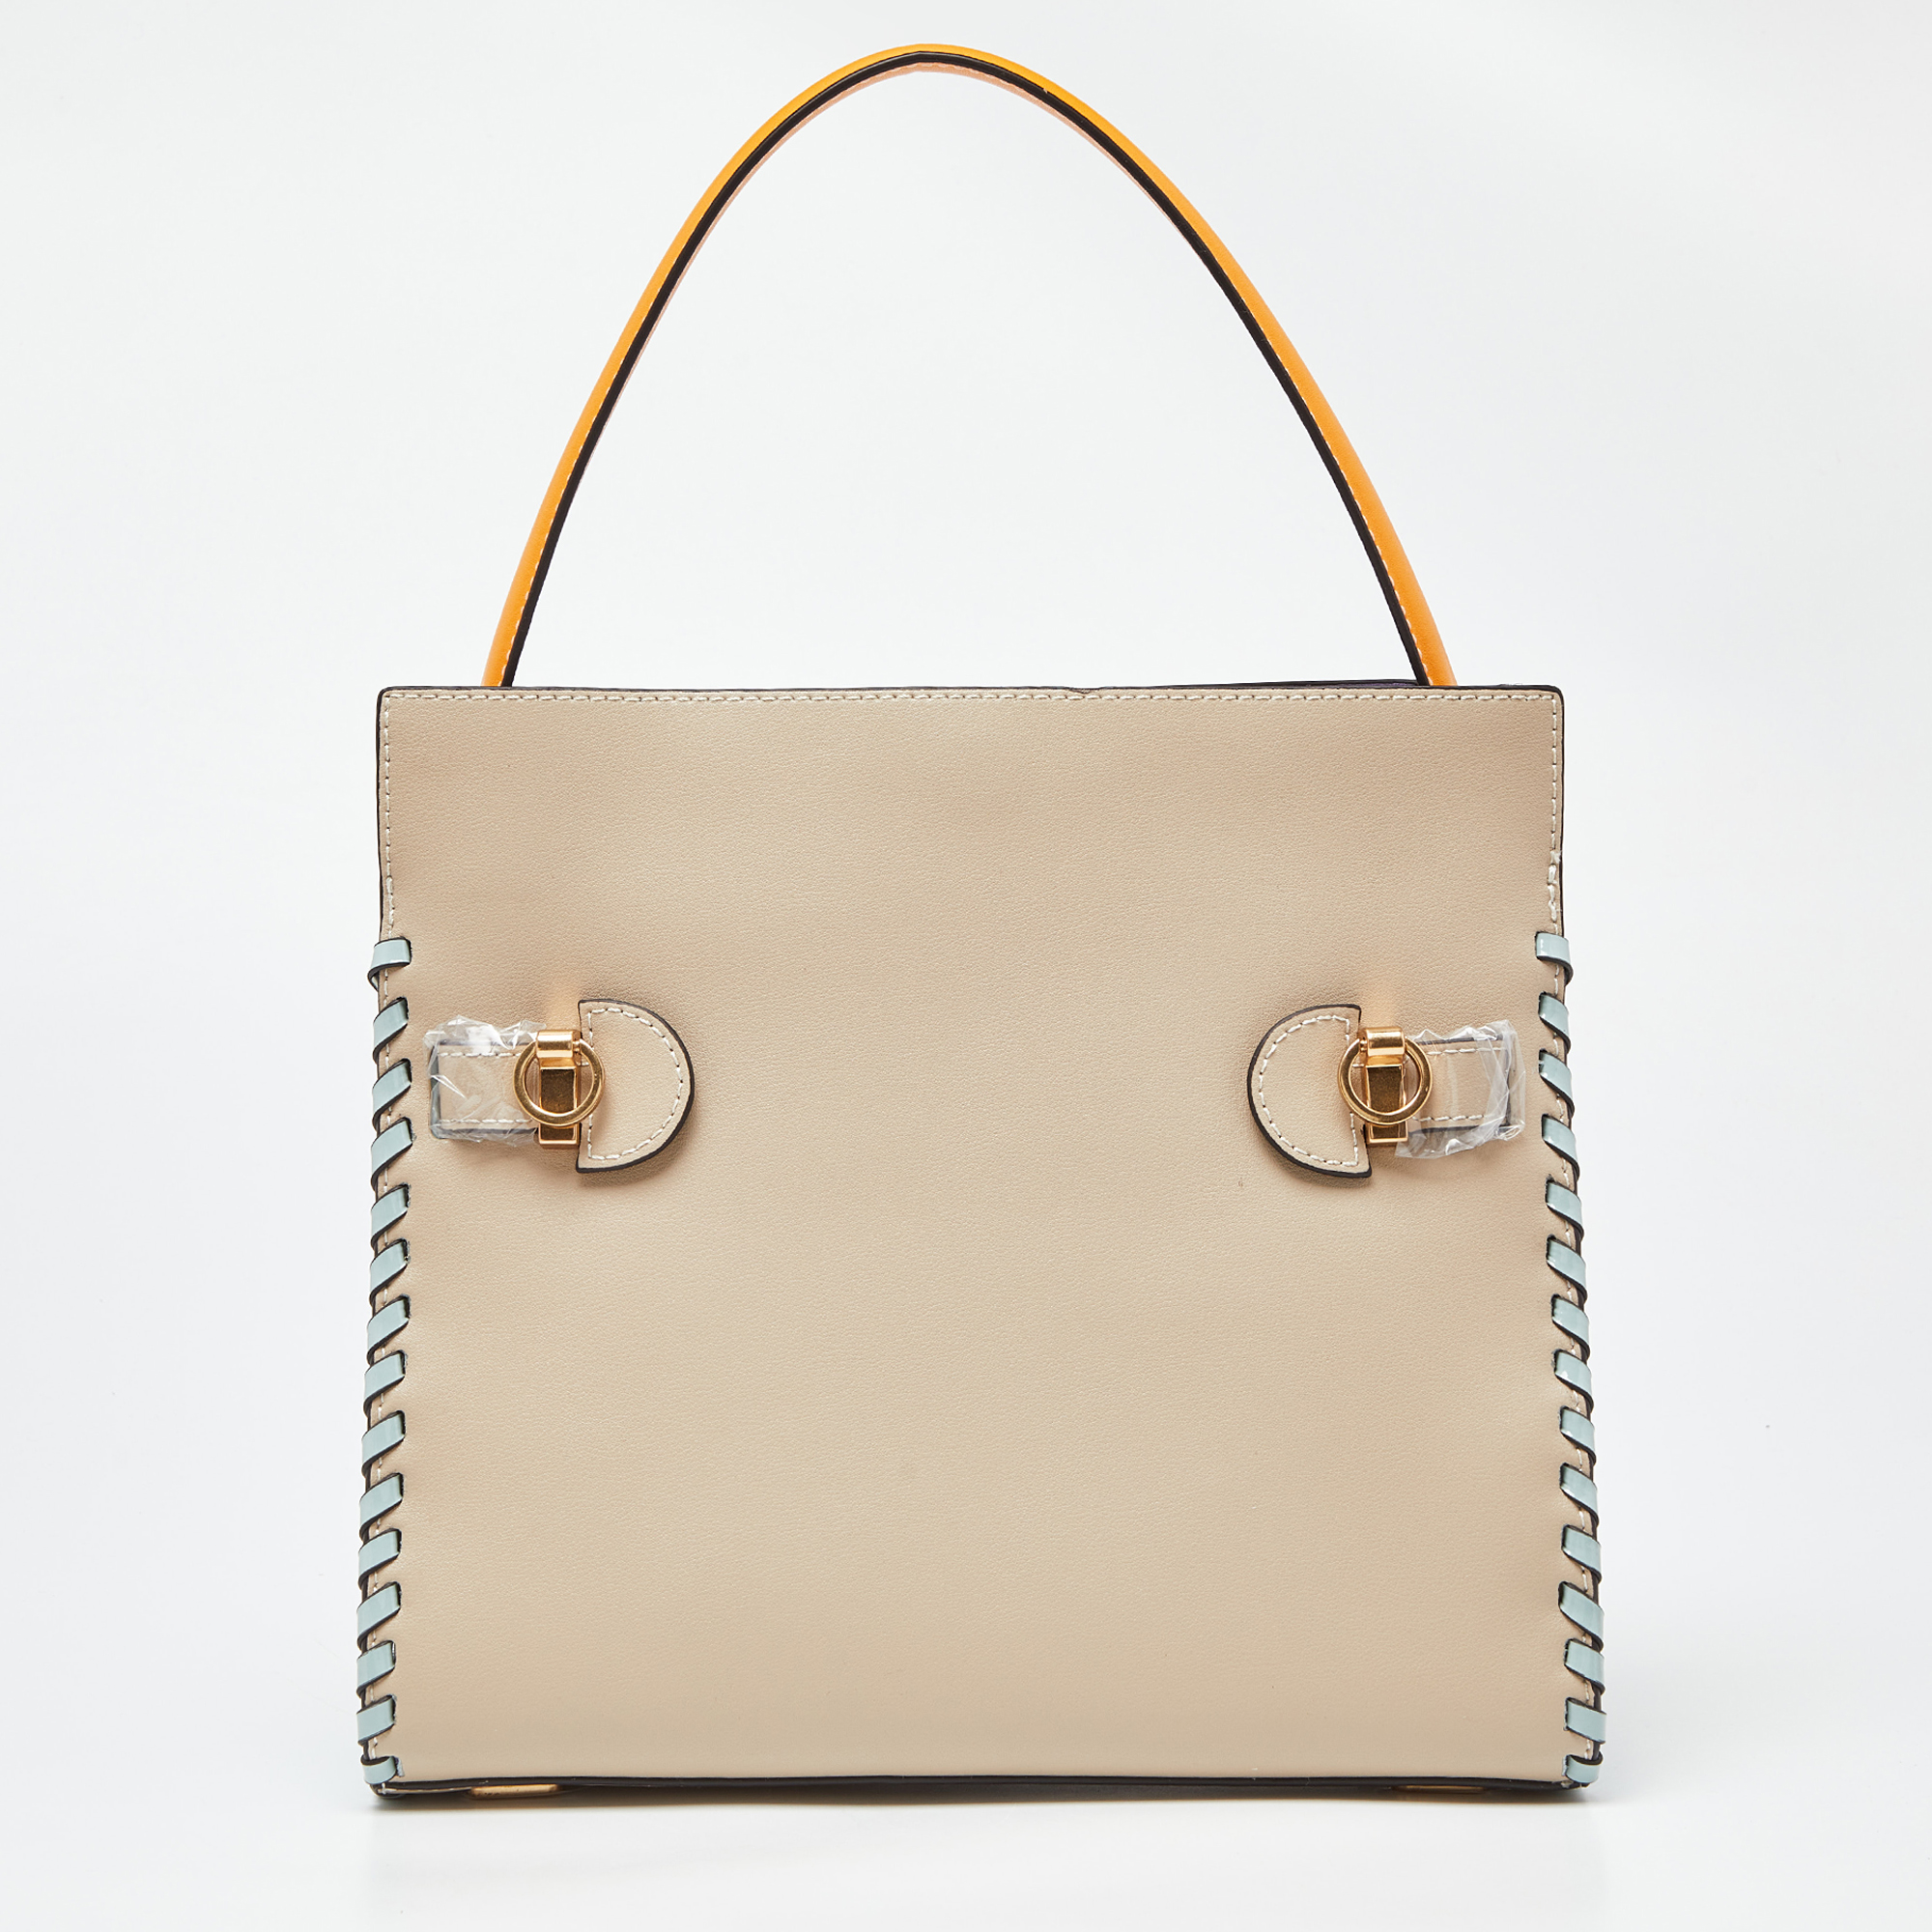 Tory Burch Multicolor Leather And Suede Small Lee Radziwill Whipstitch Lee Radziwill Top Hande Bag